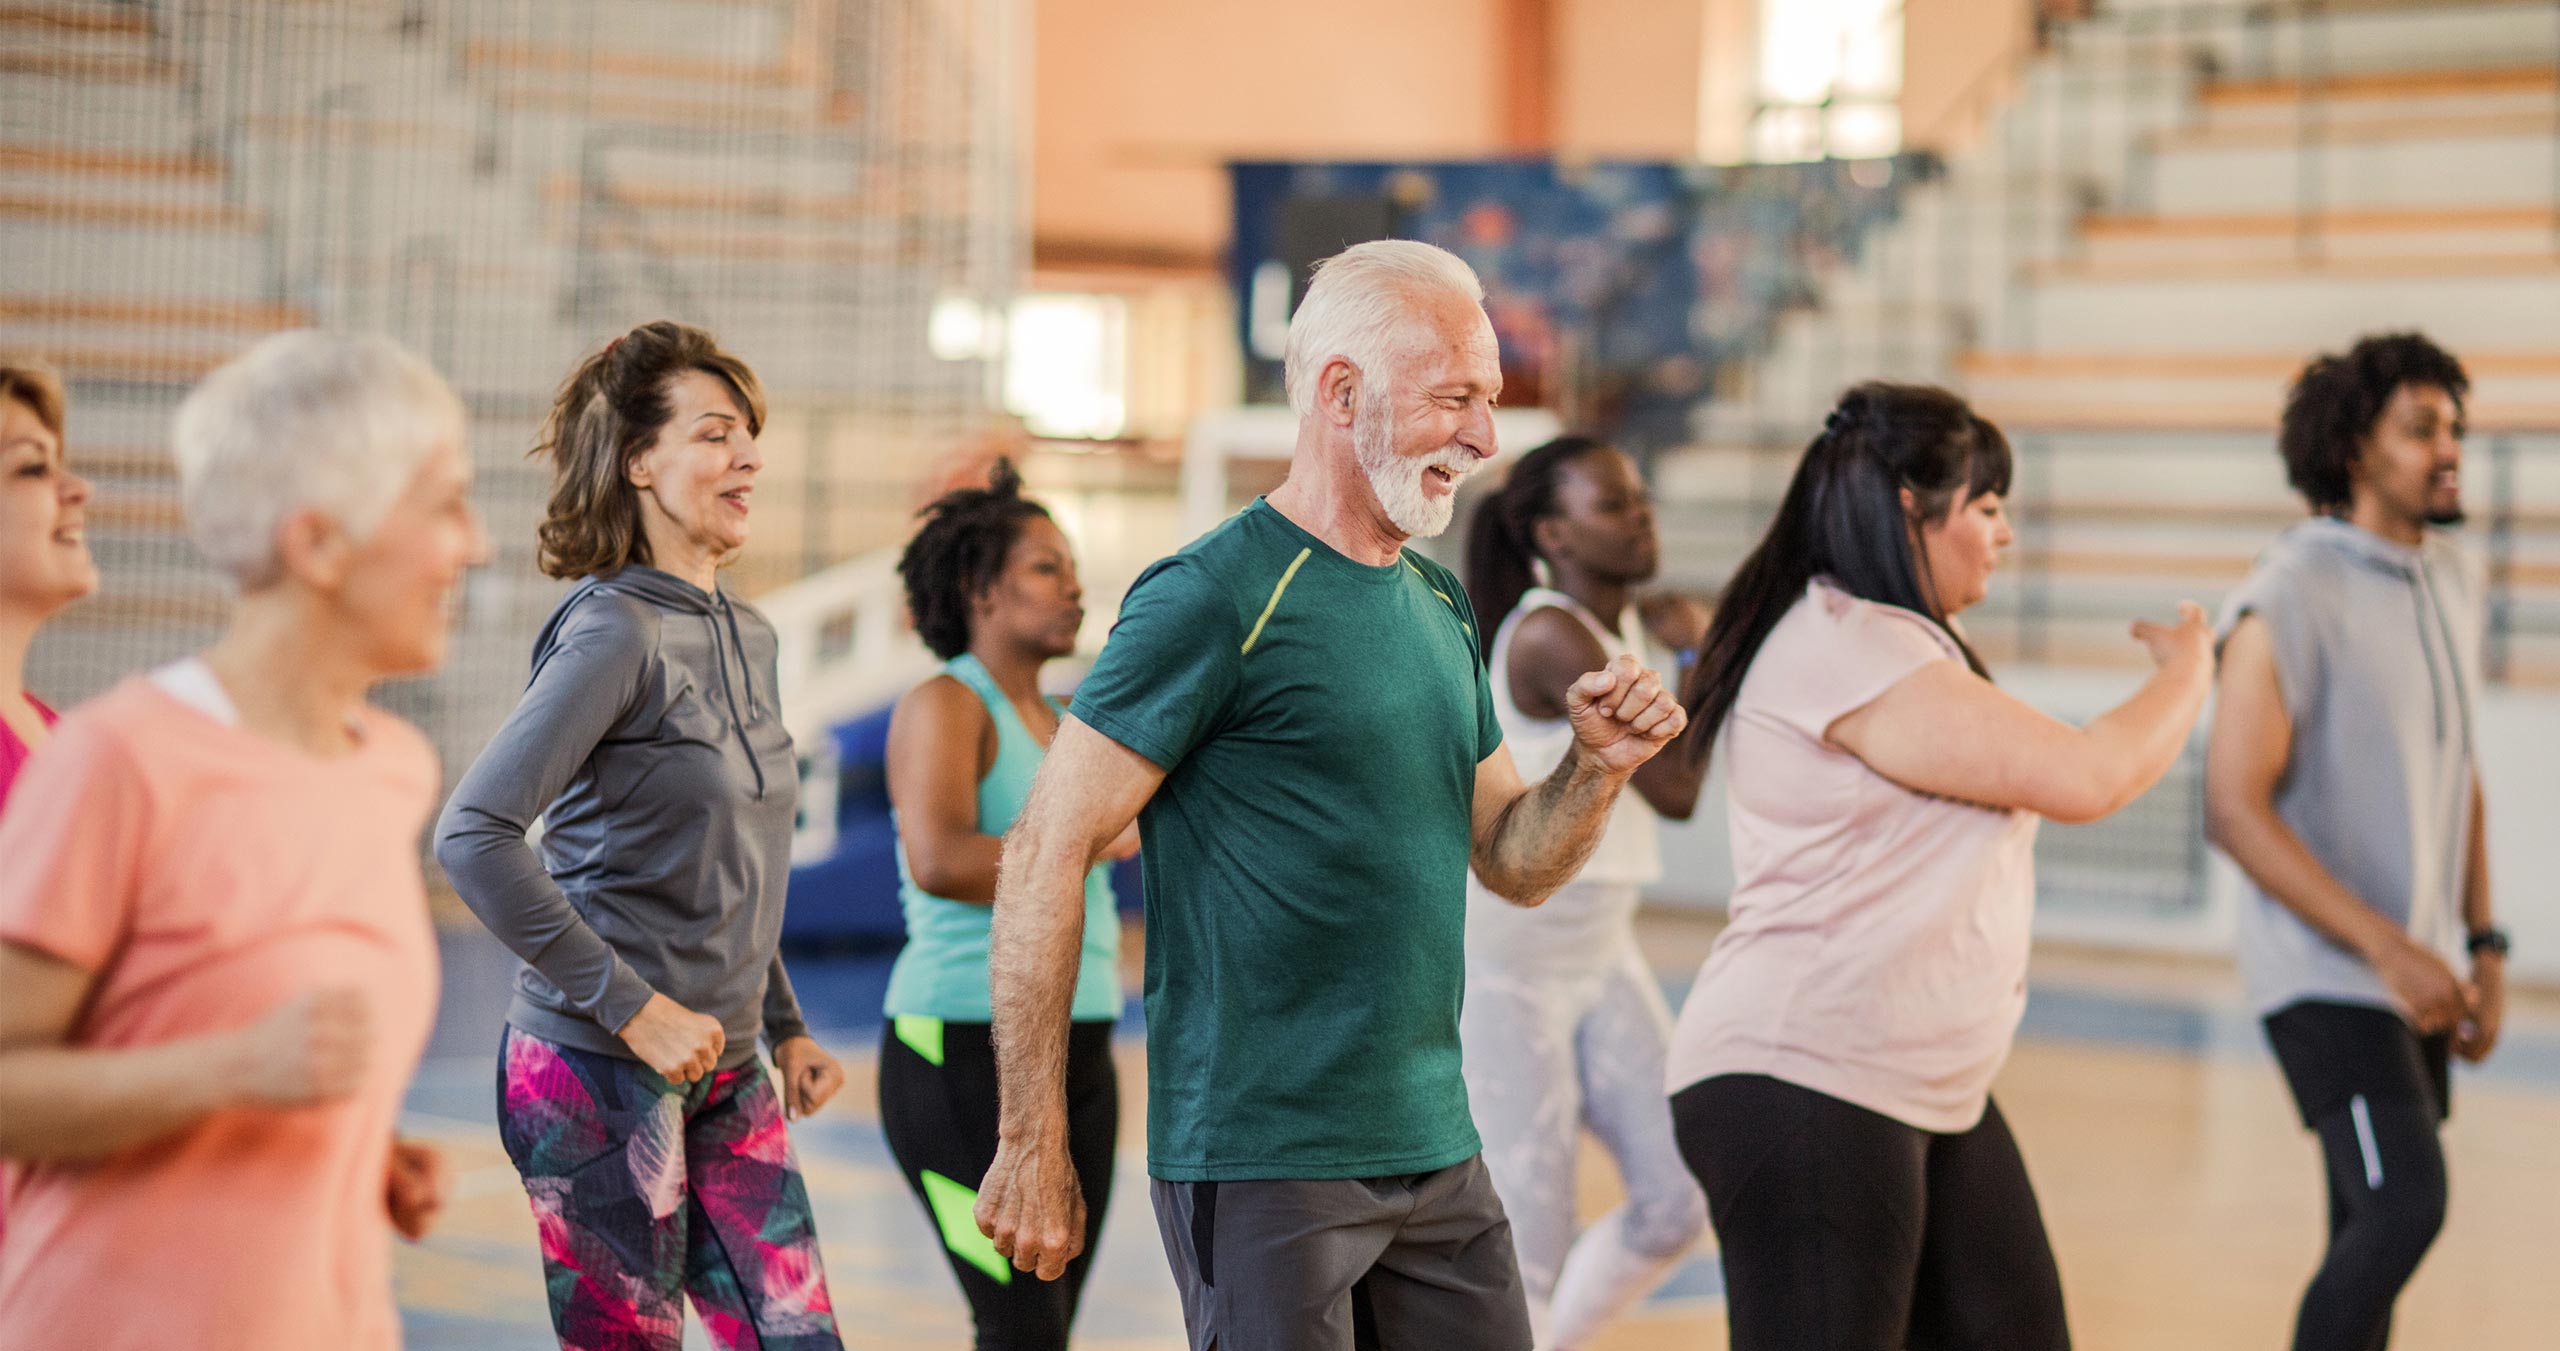 People of diverse cultures and ages enjoying an exercise class.